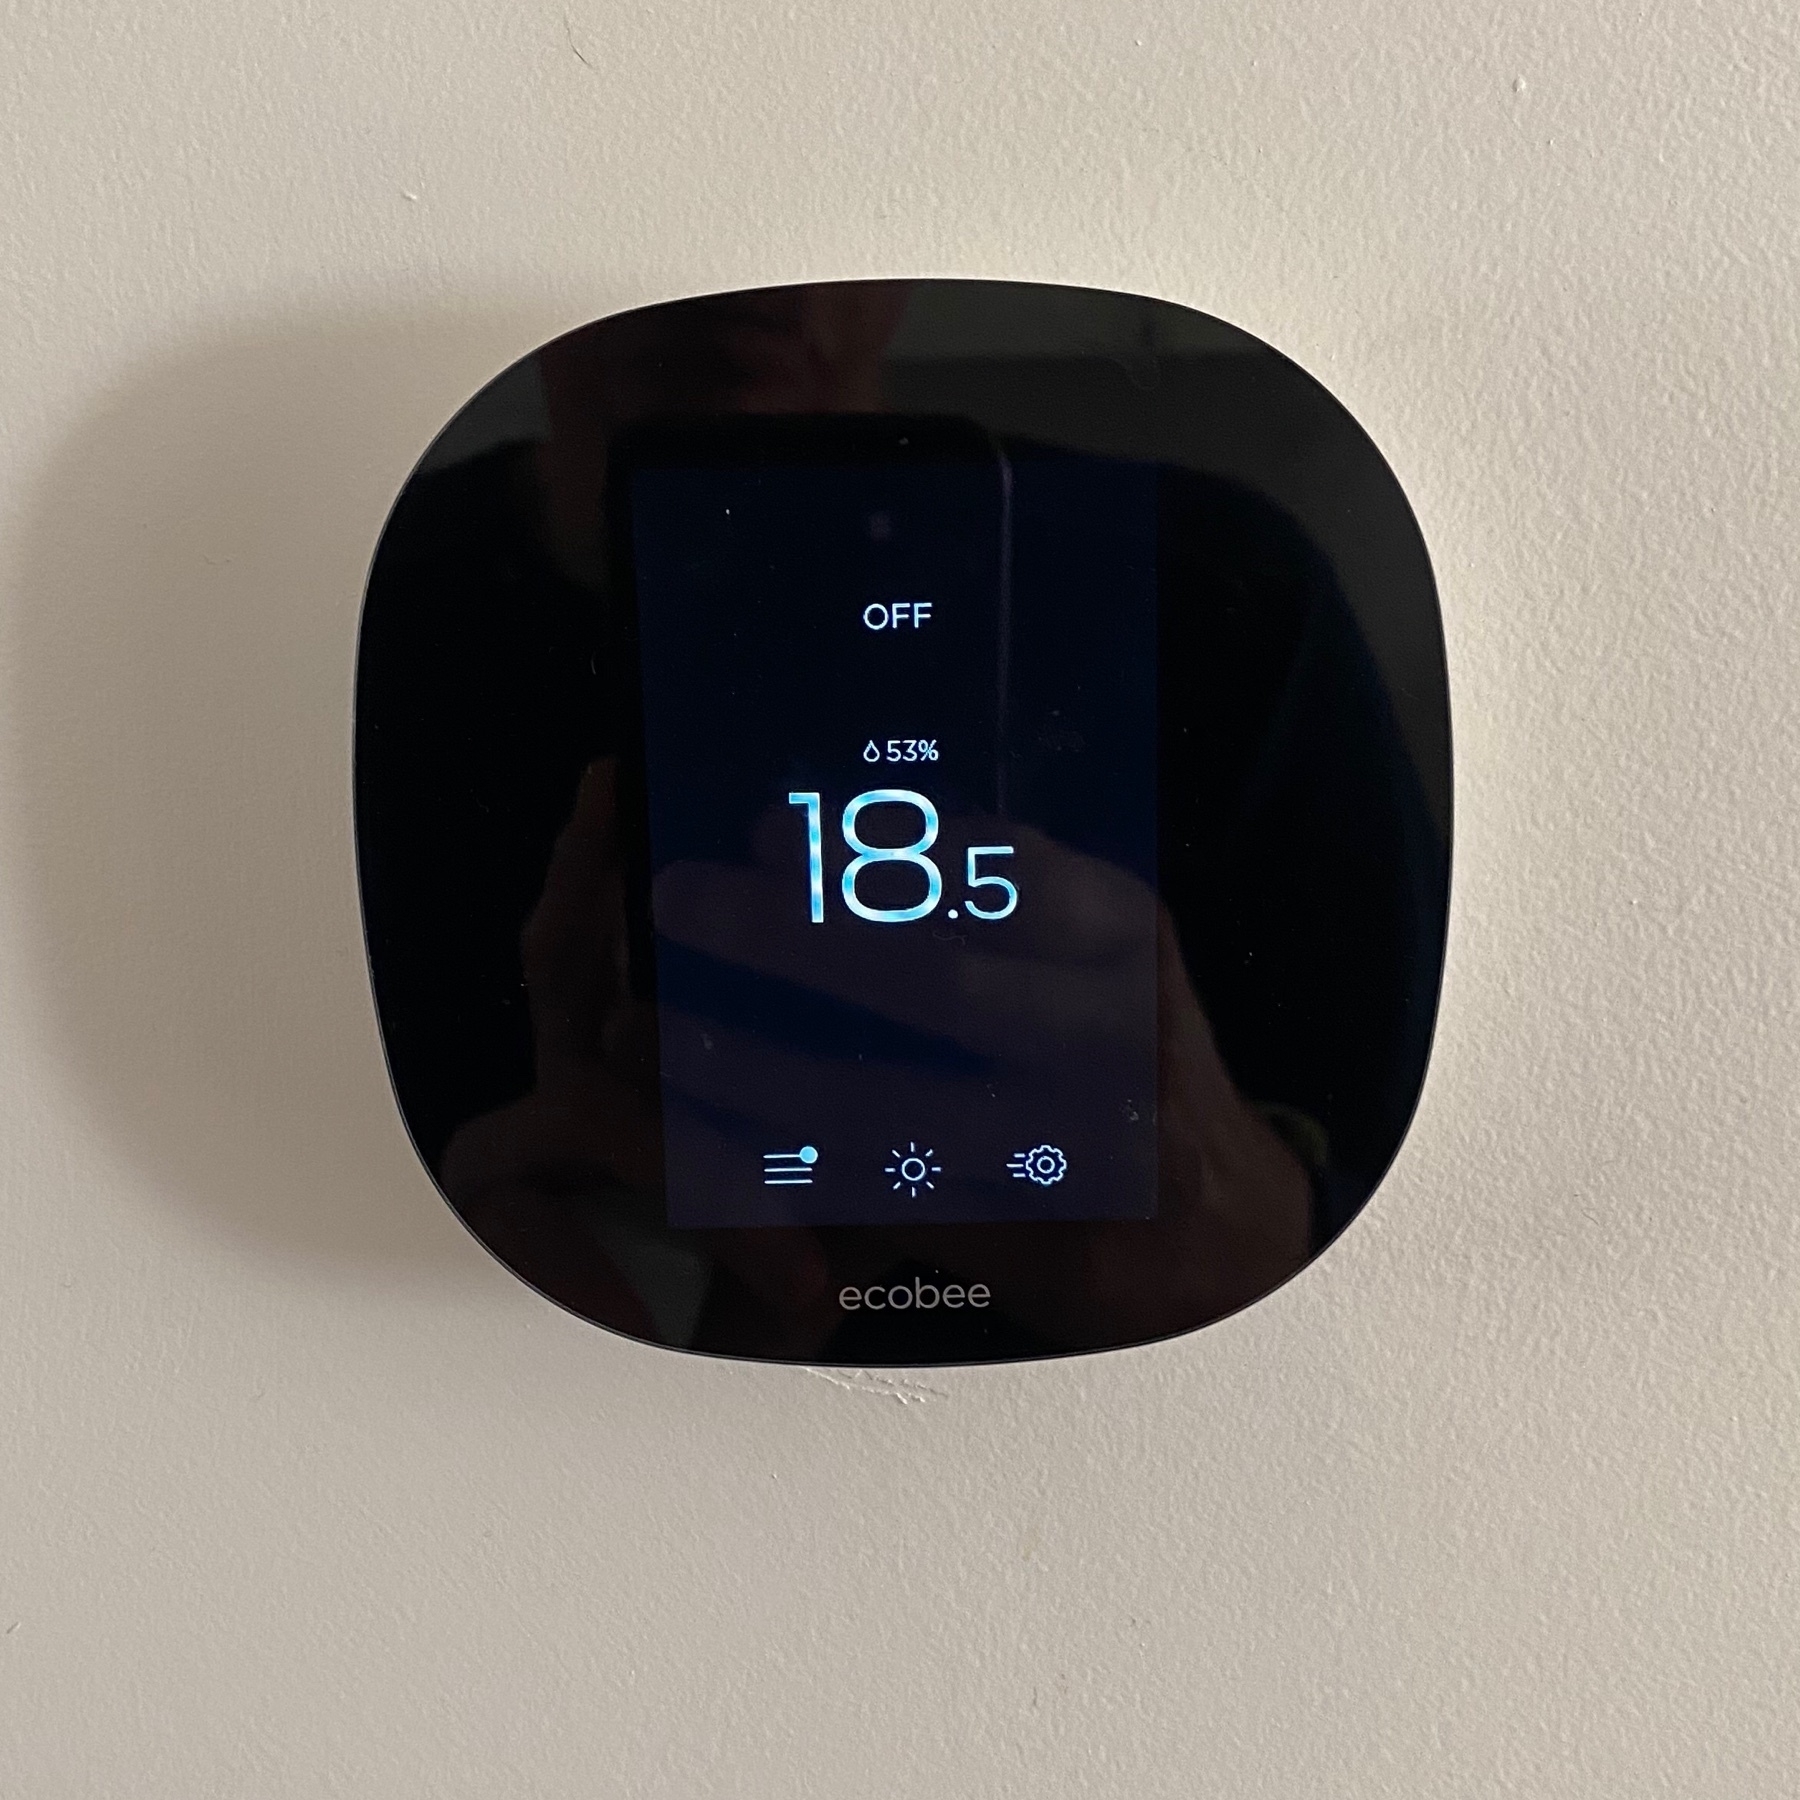 Ecobee thermostat showing 18.5ºC